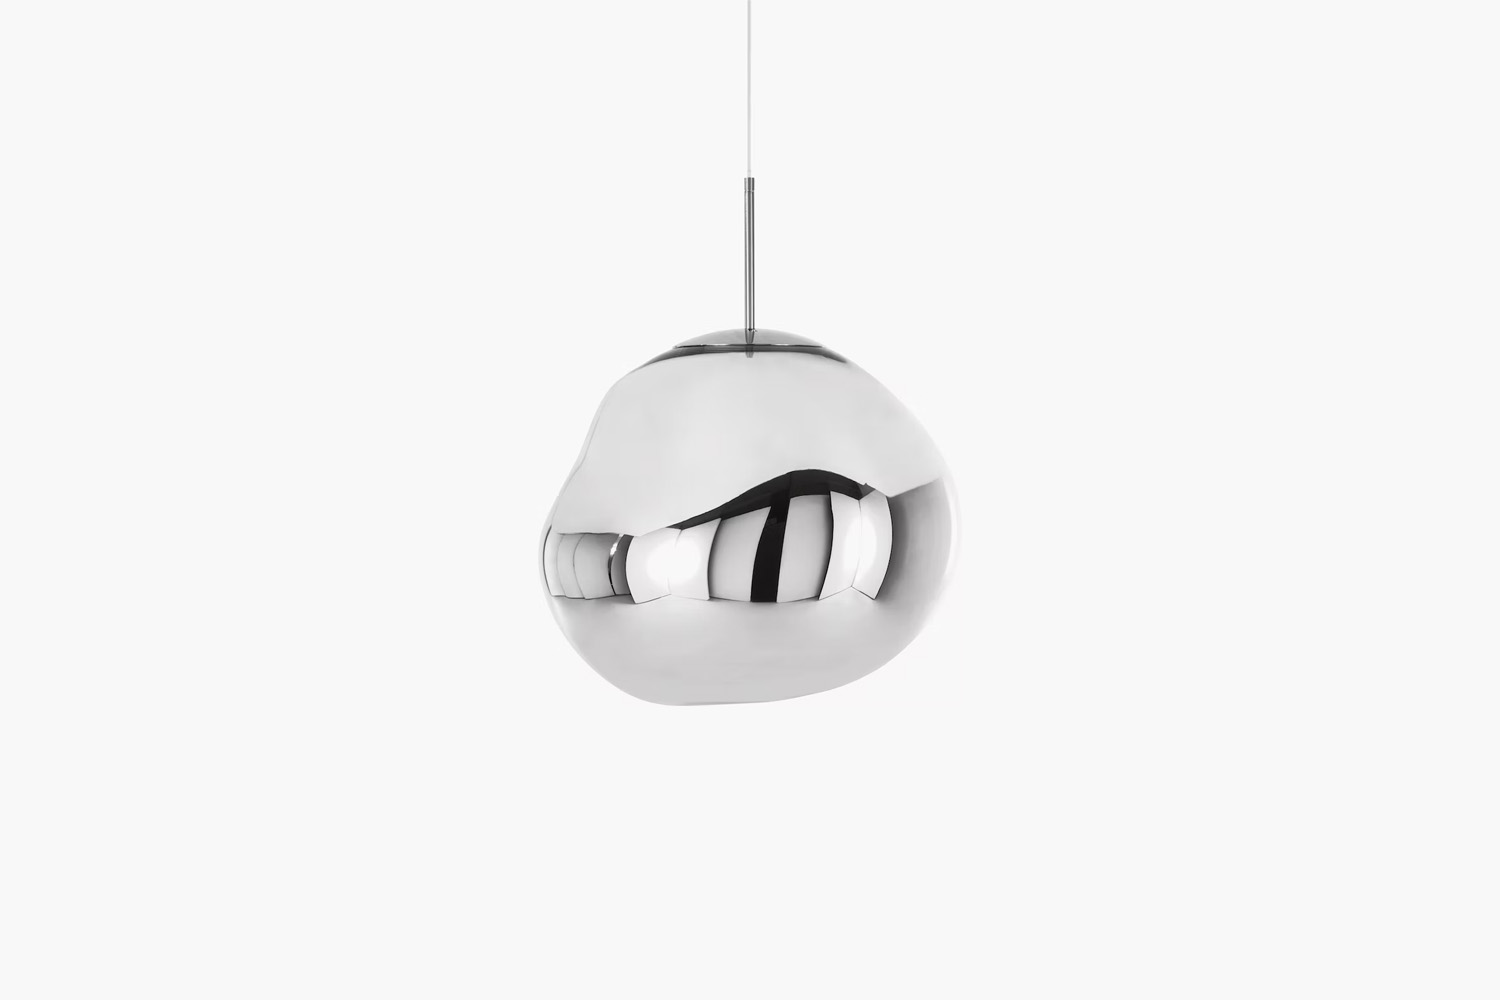 the tom dixon melt pendant is \$\1,064 at design within reach. 10